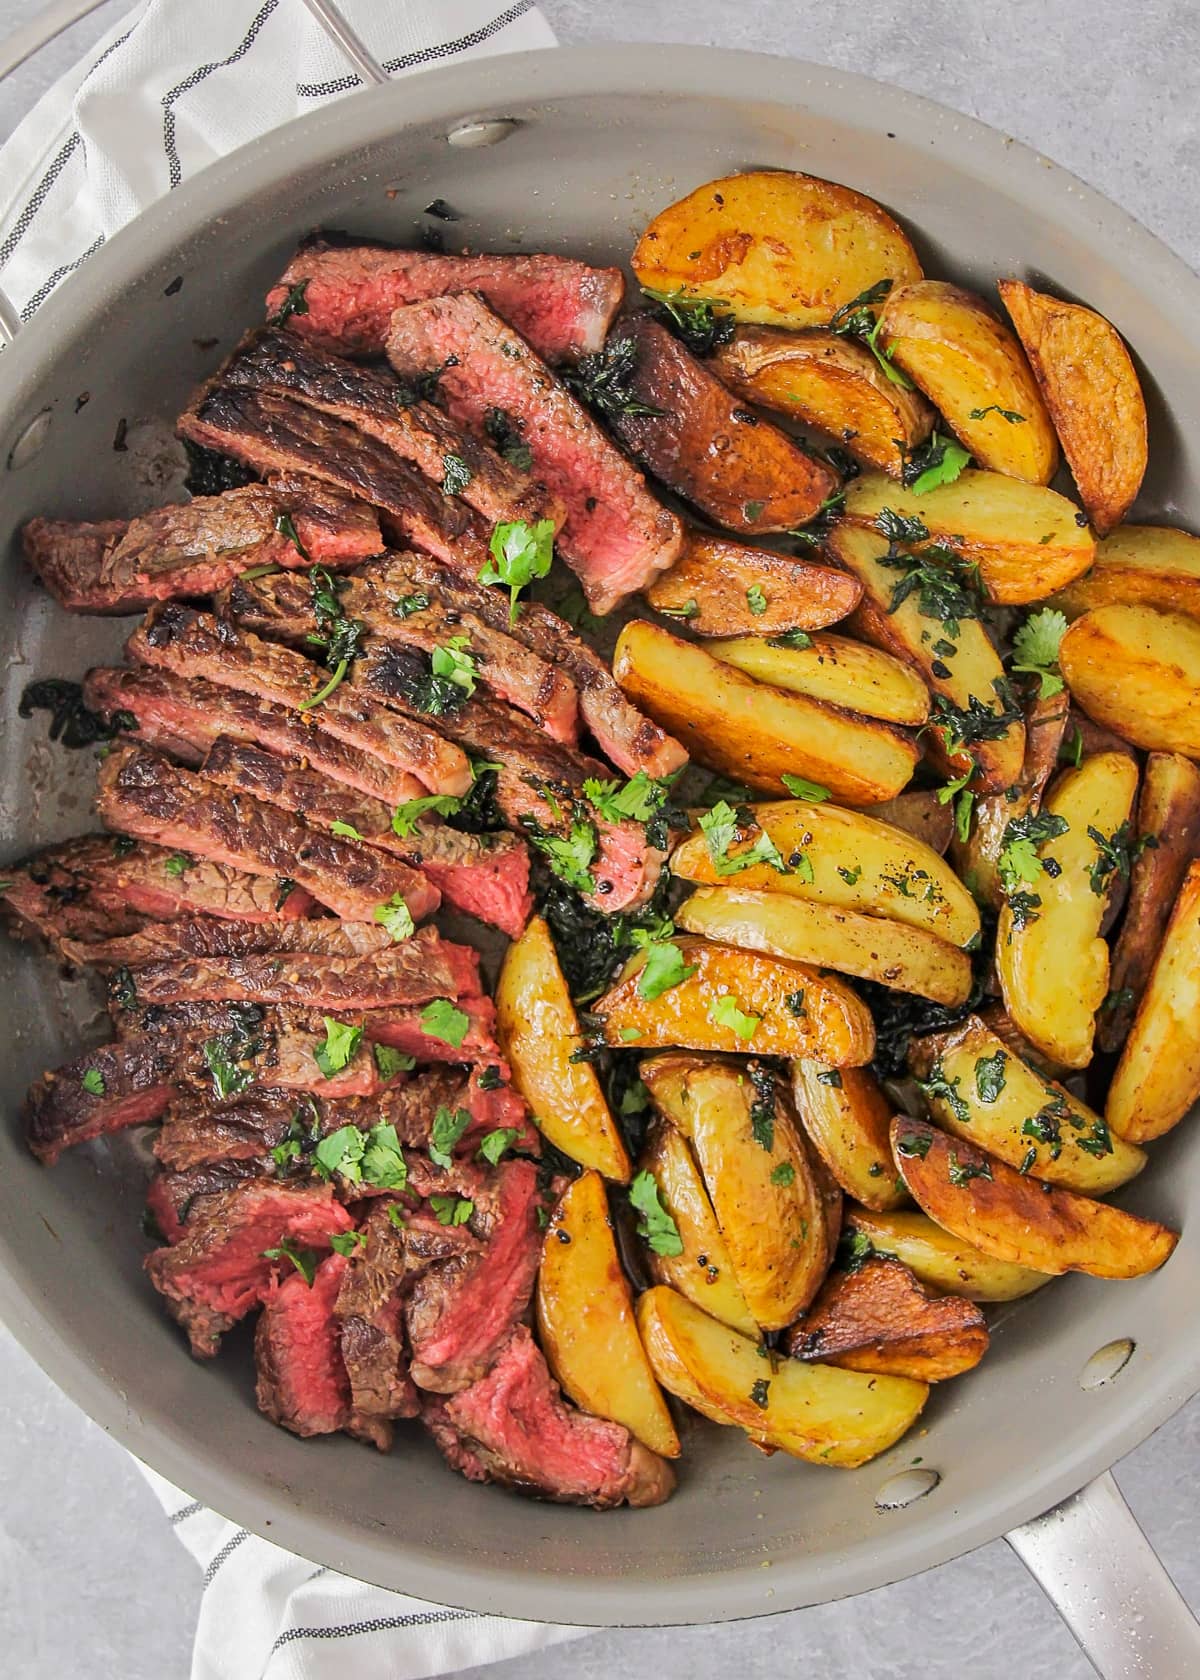 Sliced steak and potato wedges served in a skillet and topped with fresh herbs.